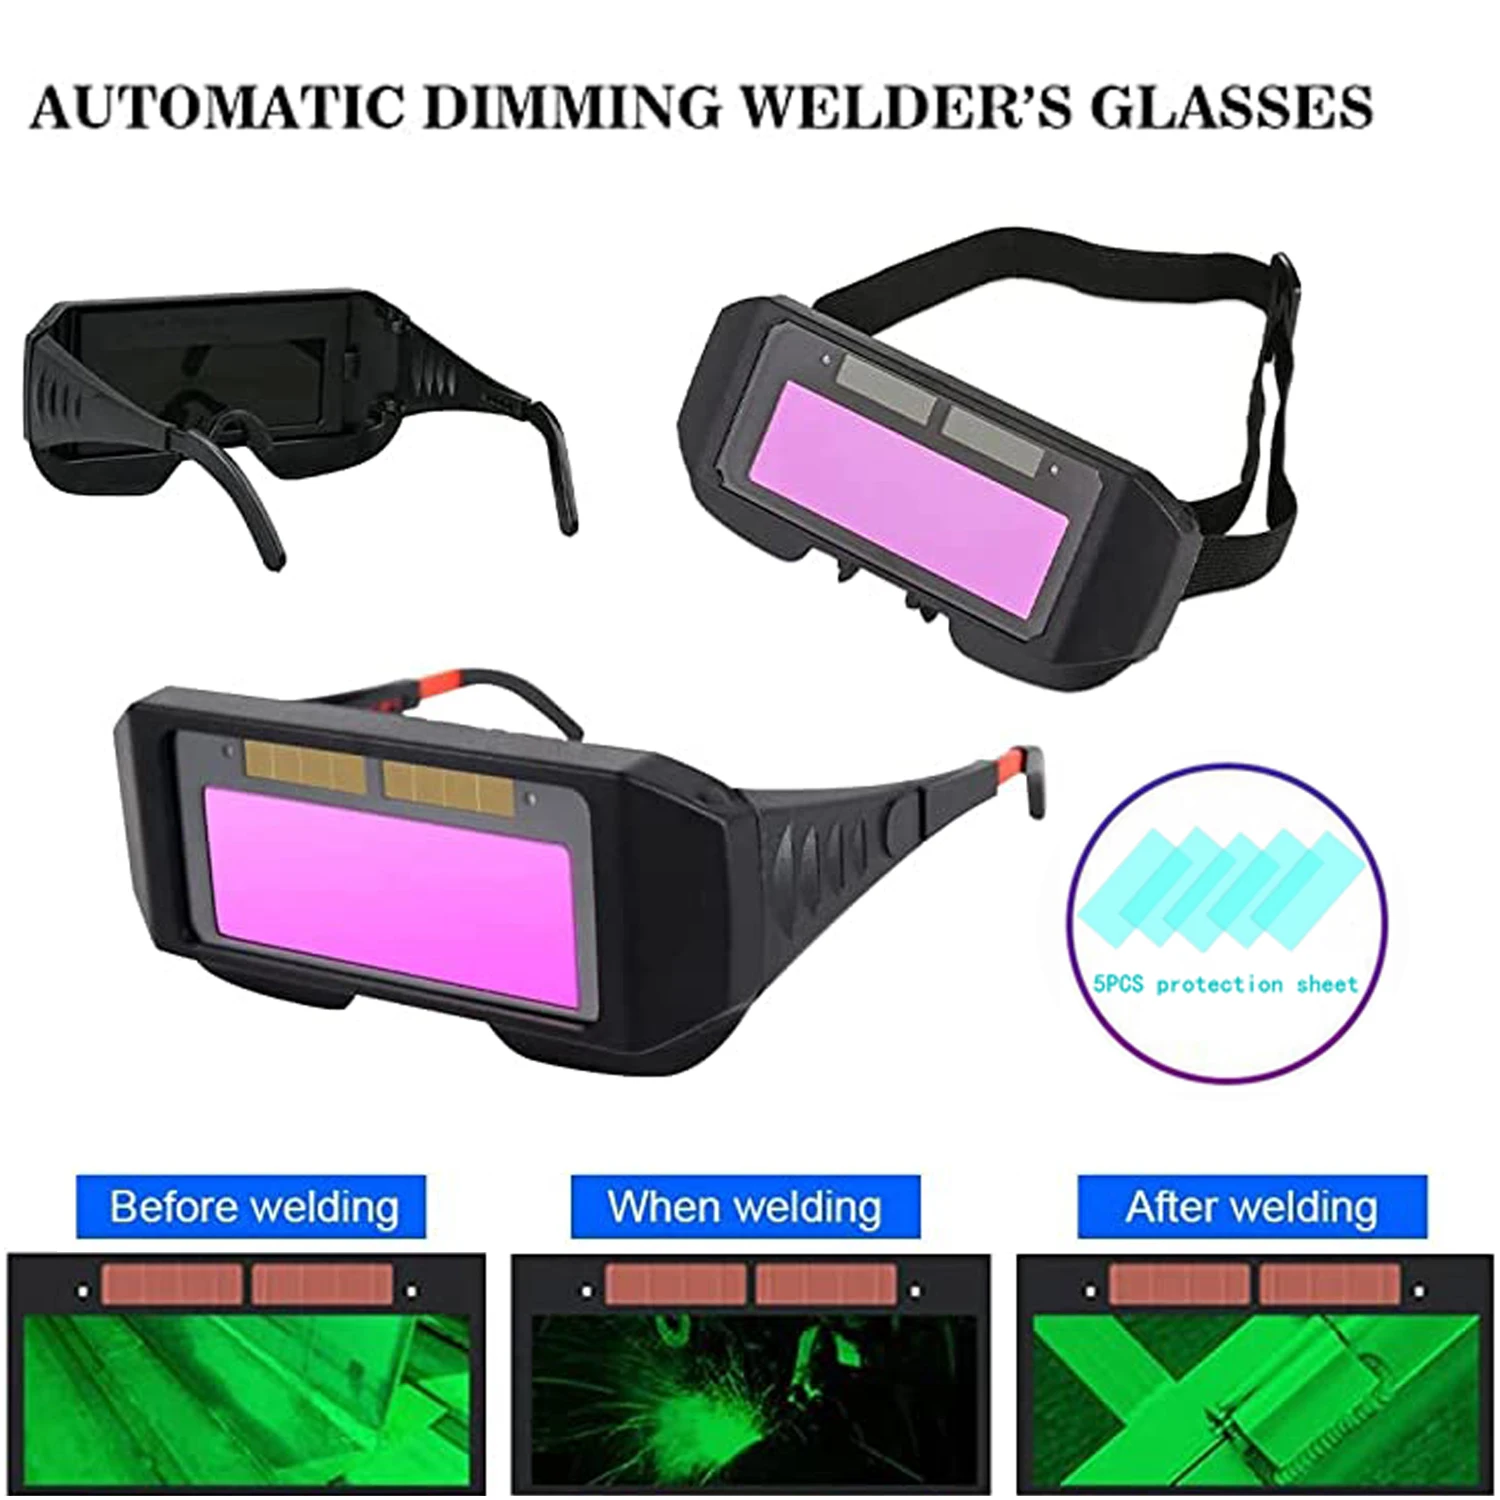 Solar Auto Darkening Welding Goggles Welder Glasses Safety Protective Welder Helmet with Adjustable Shade  Anti-glare Goggles welder mask welding helmet with rechargeable headlight automatic dimming electric welding mask for arc weld welding goggles